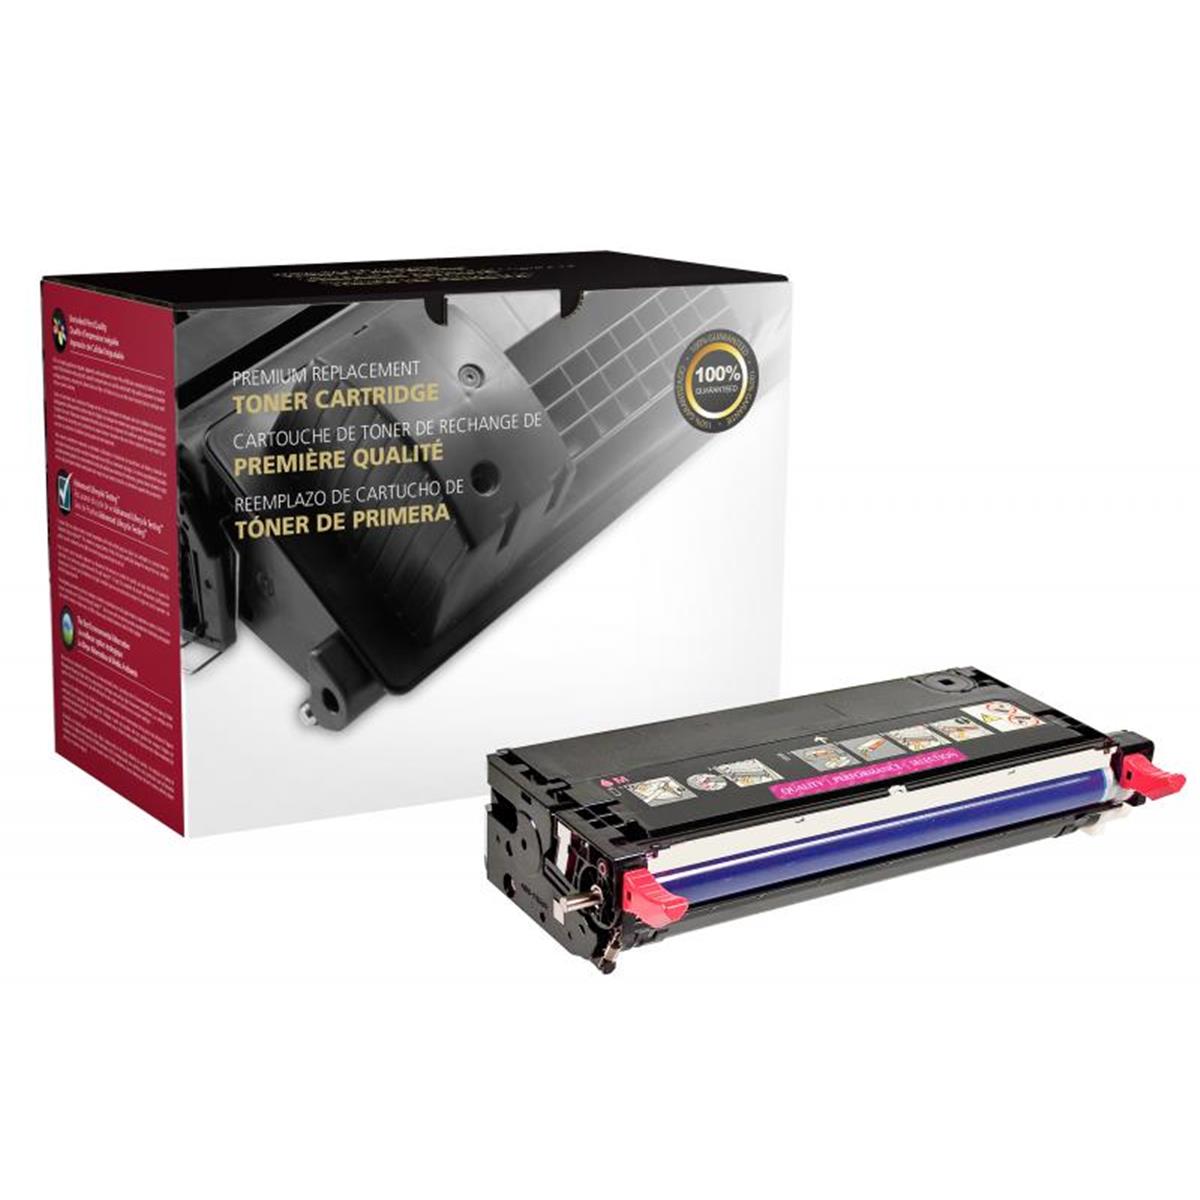 Dell 200505 High Yield Magenta Toner Cartridge for Dell 3130